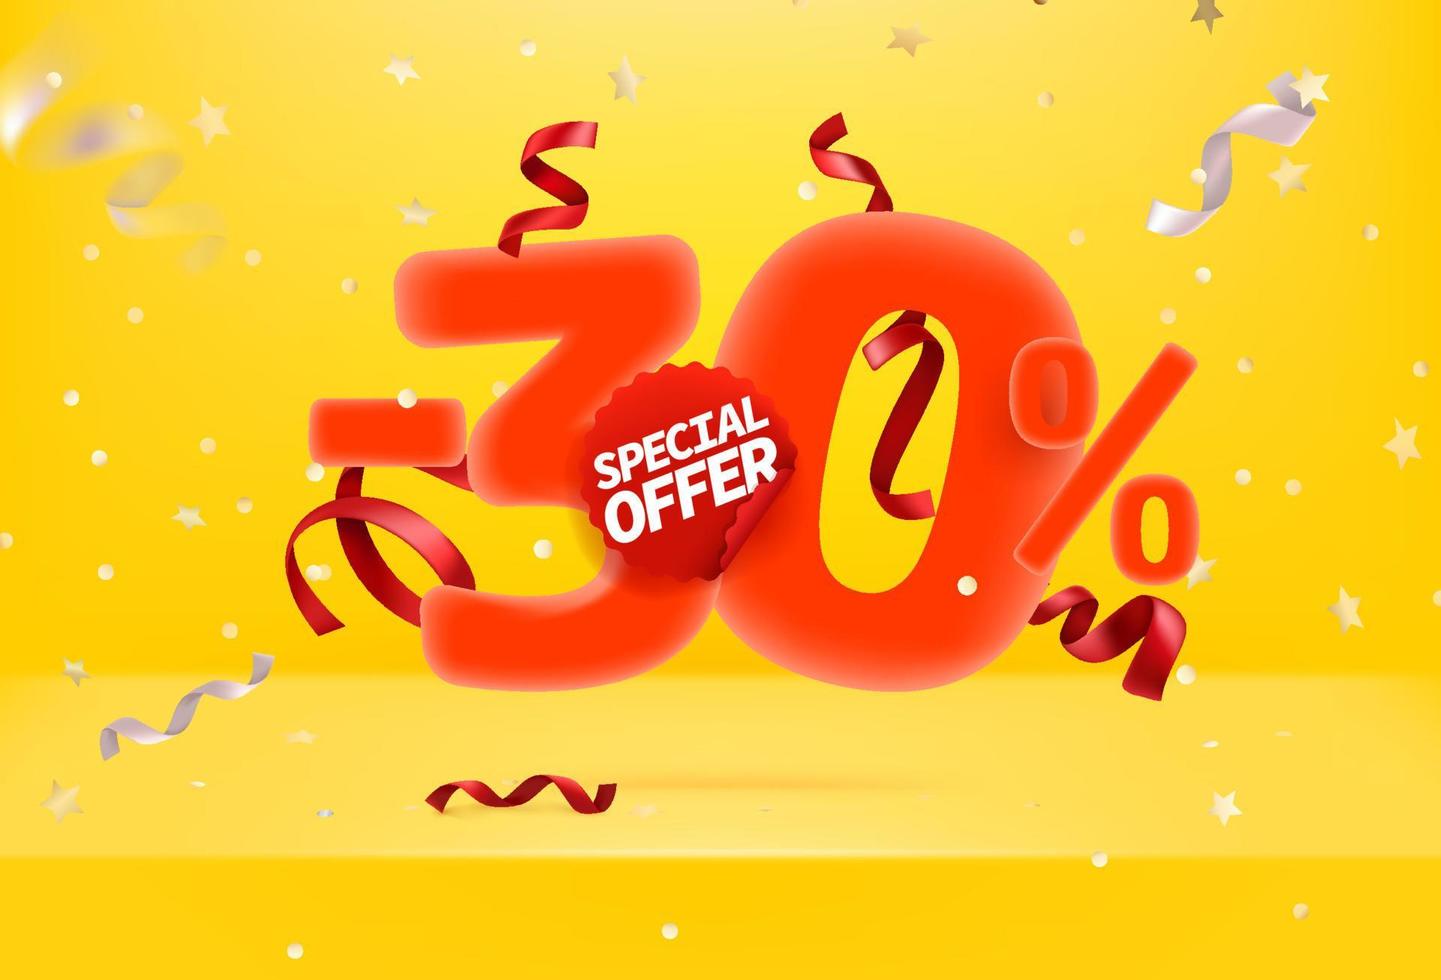 Thirty percent sale off special offer vector promo banner